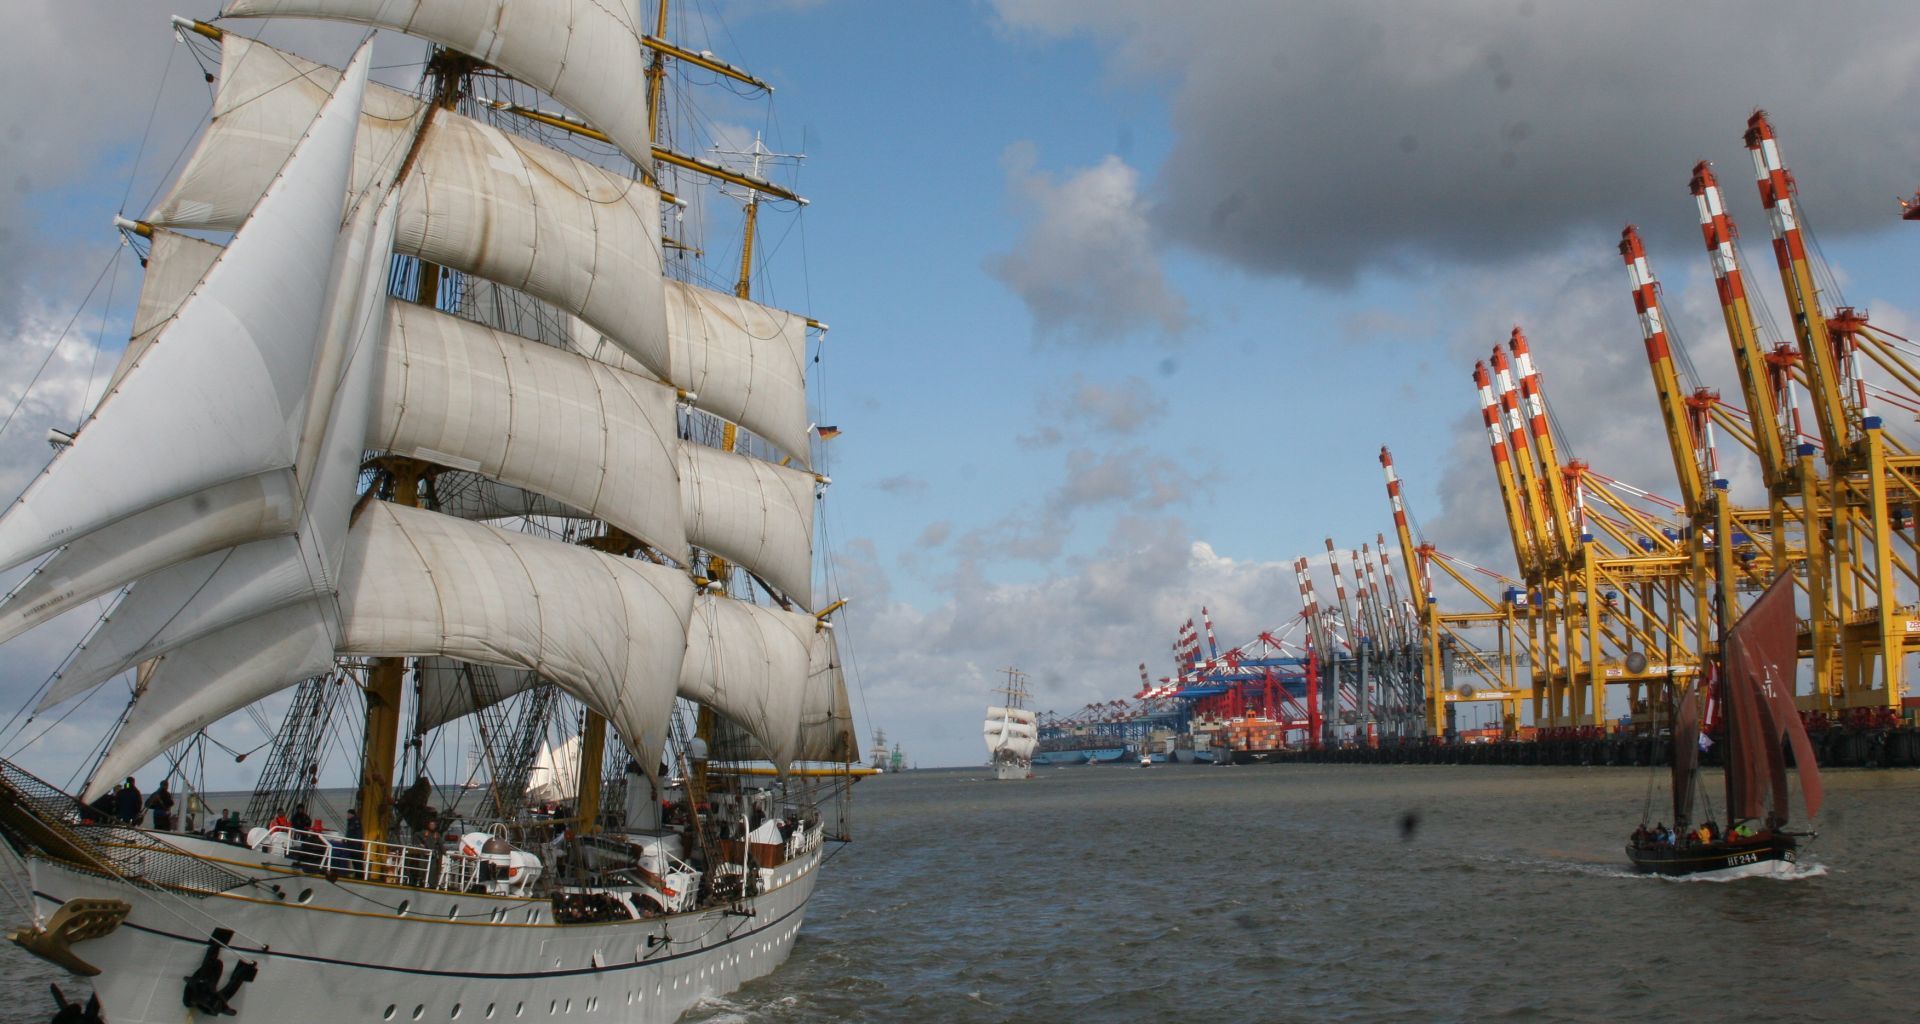 A sailing ship on a cruise, in the background a container terminal.